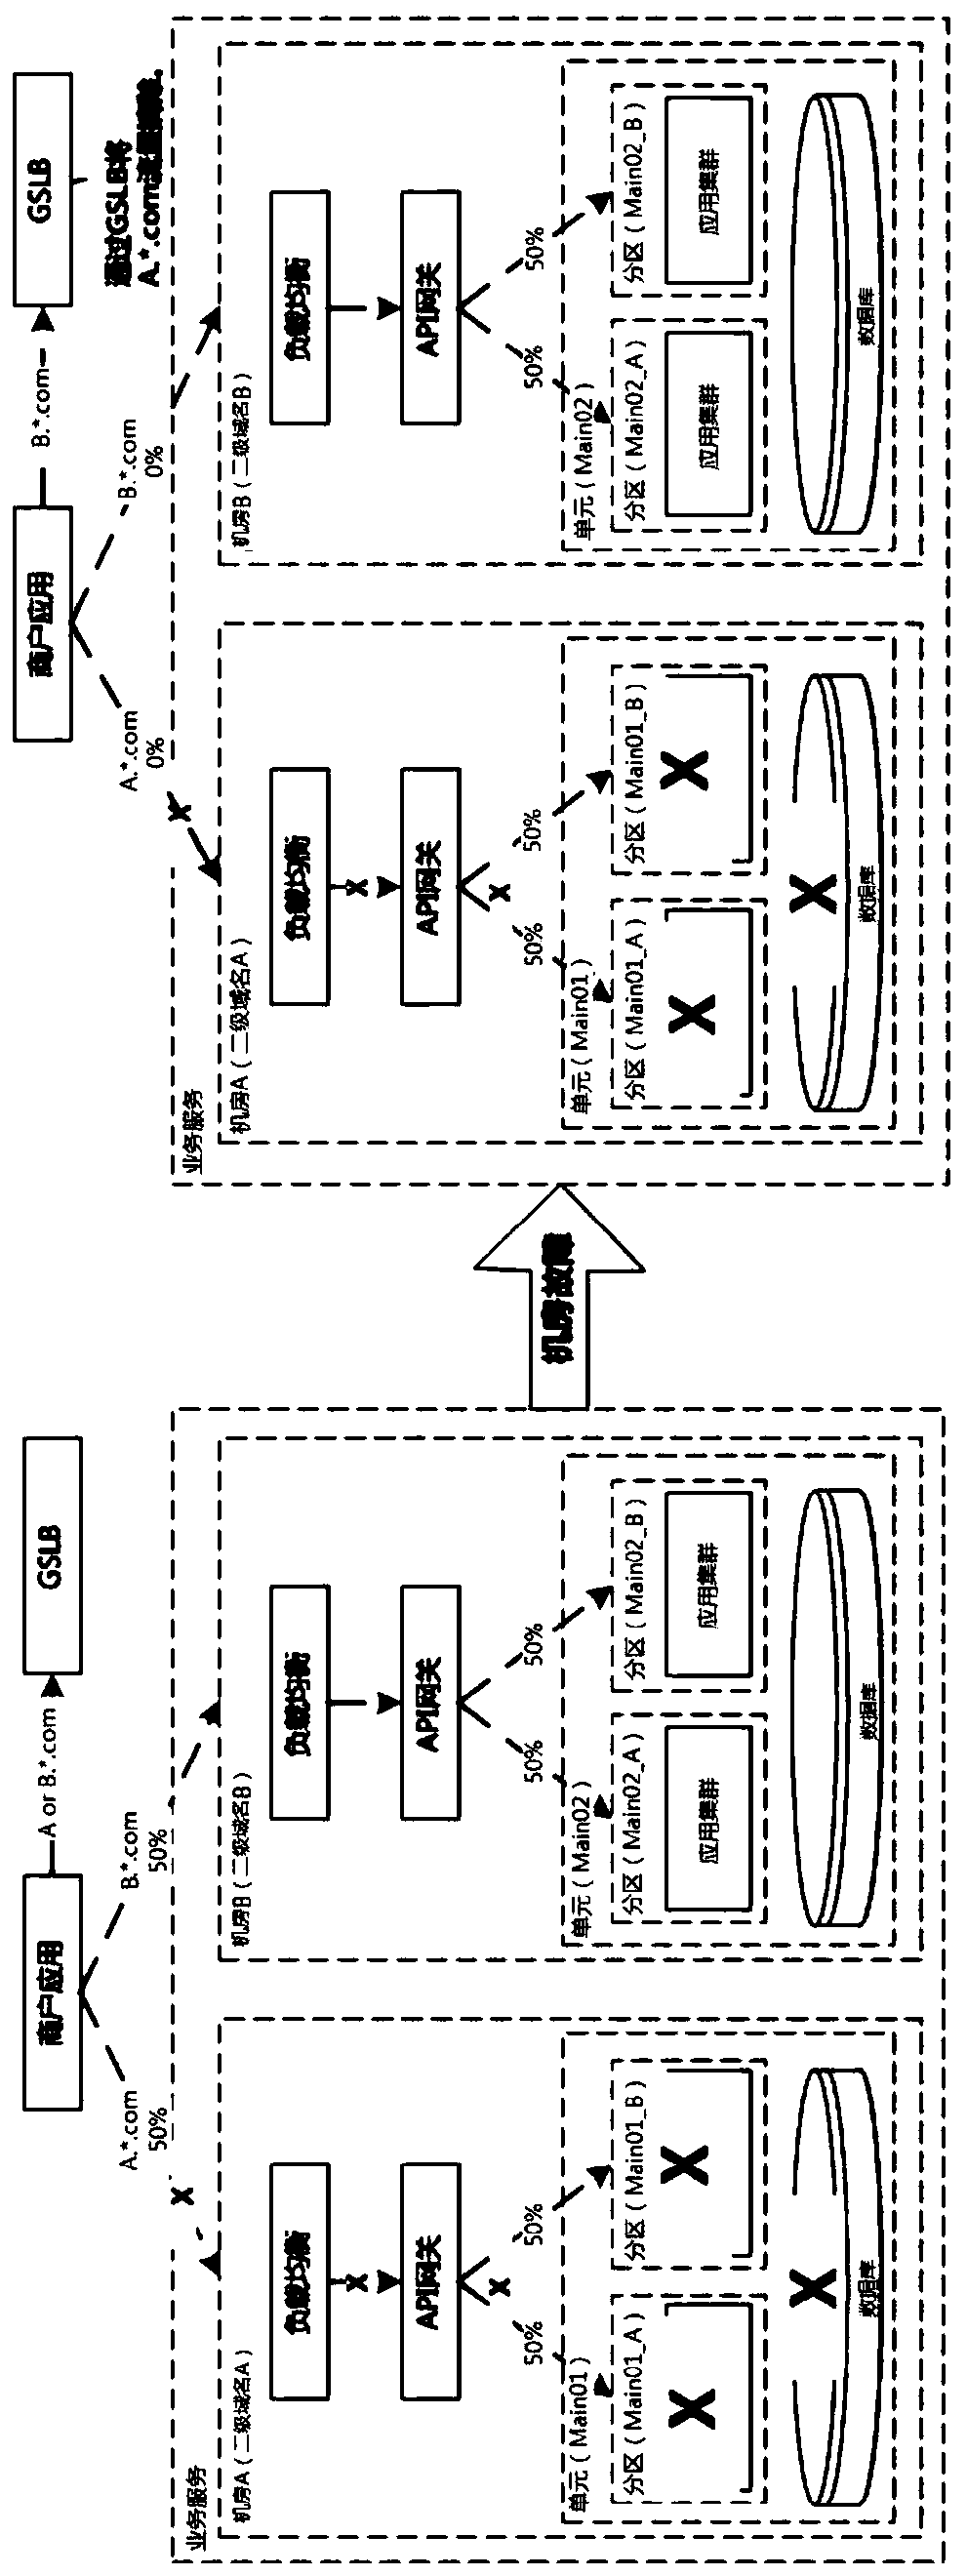 Partition-based application disaster recovery system